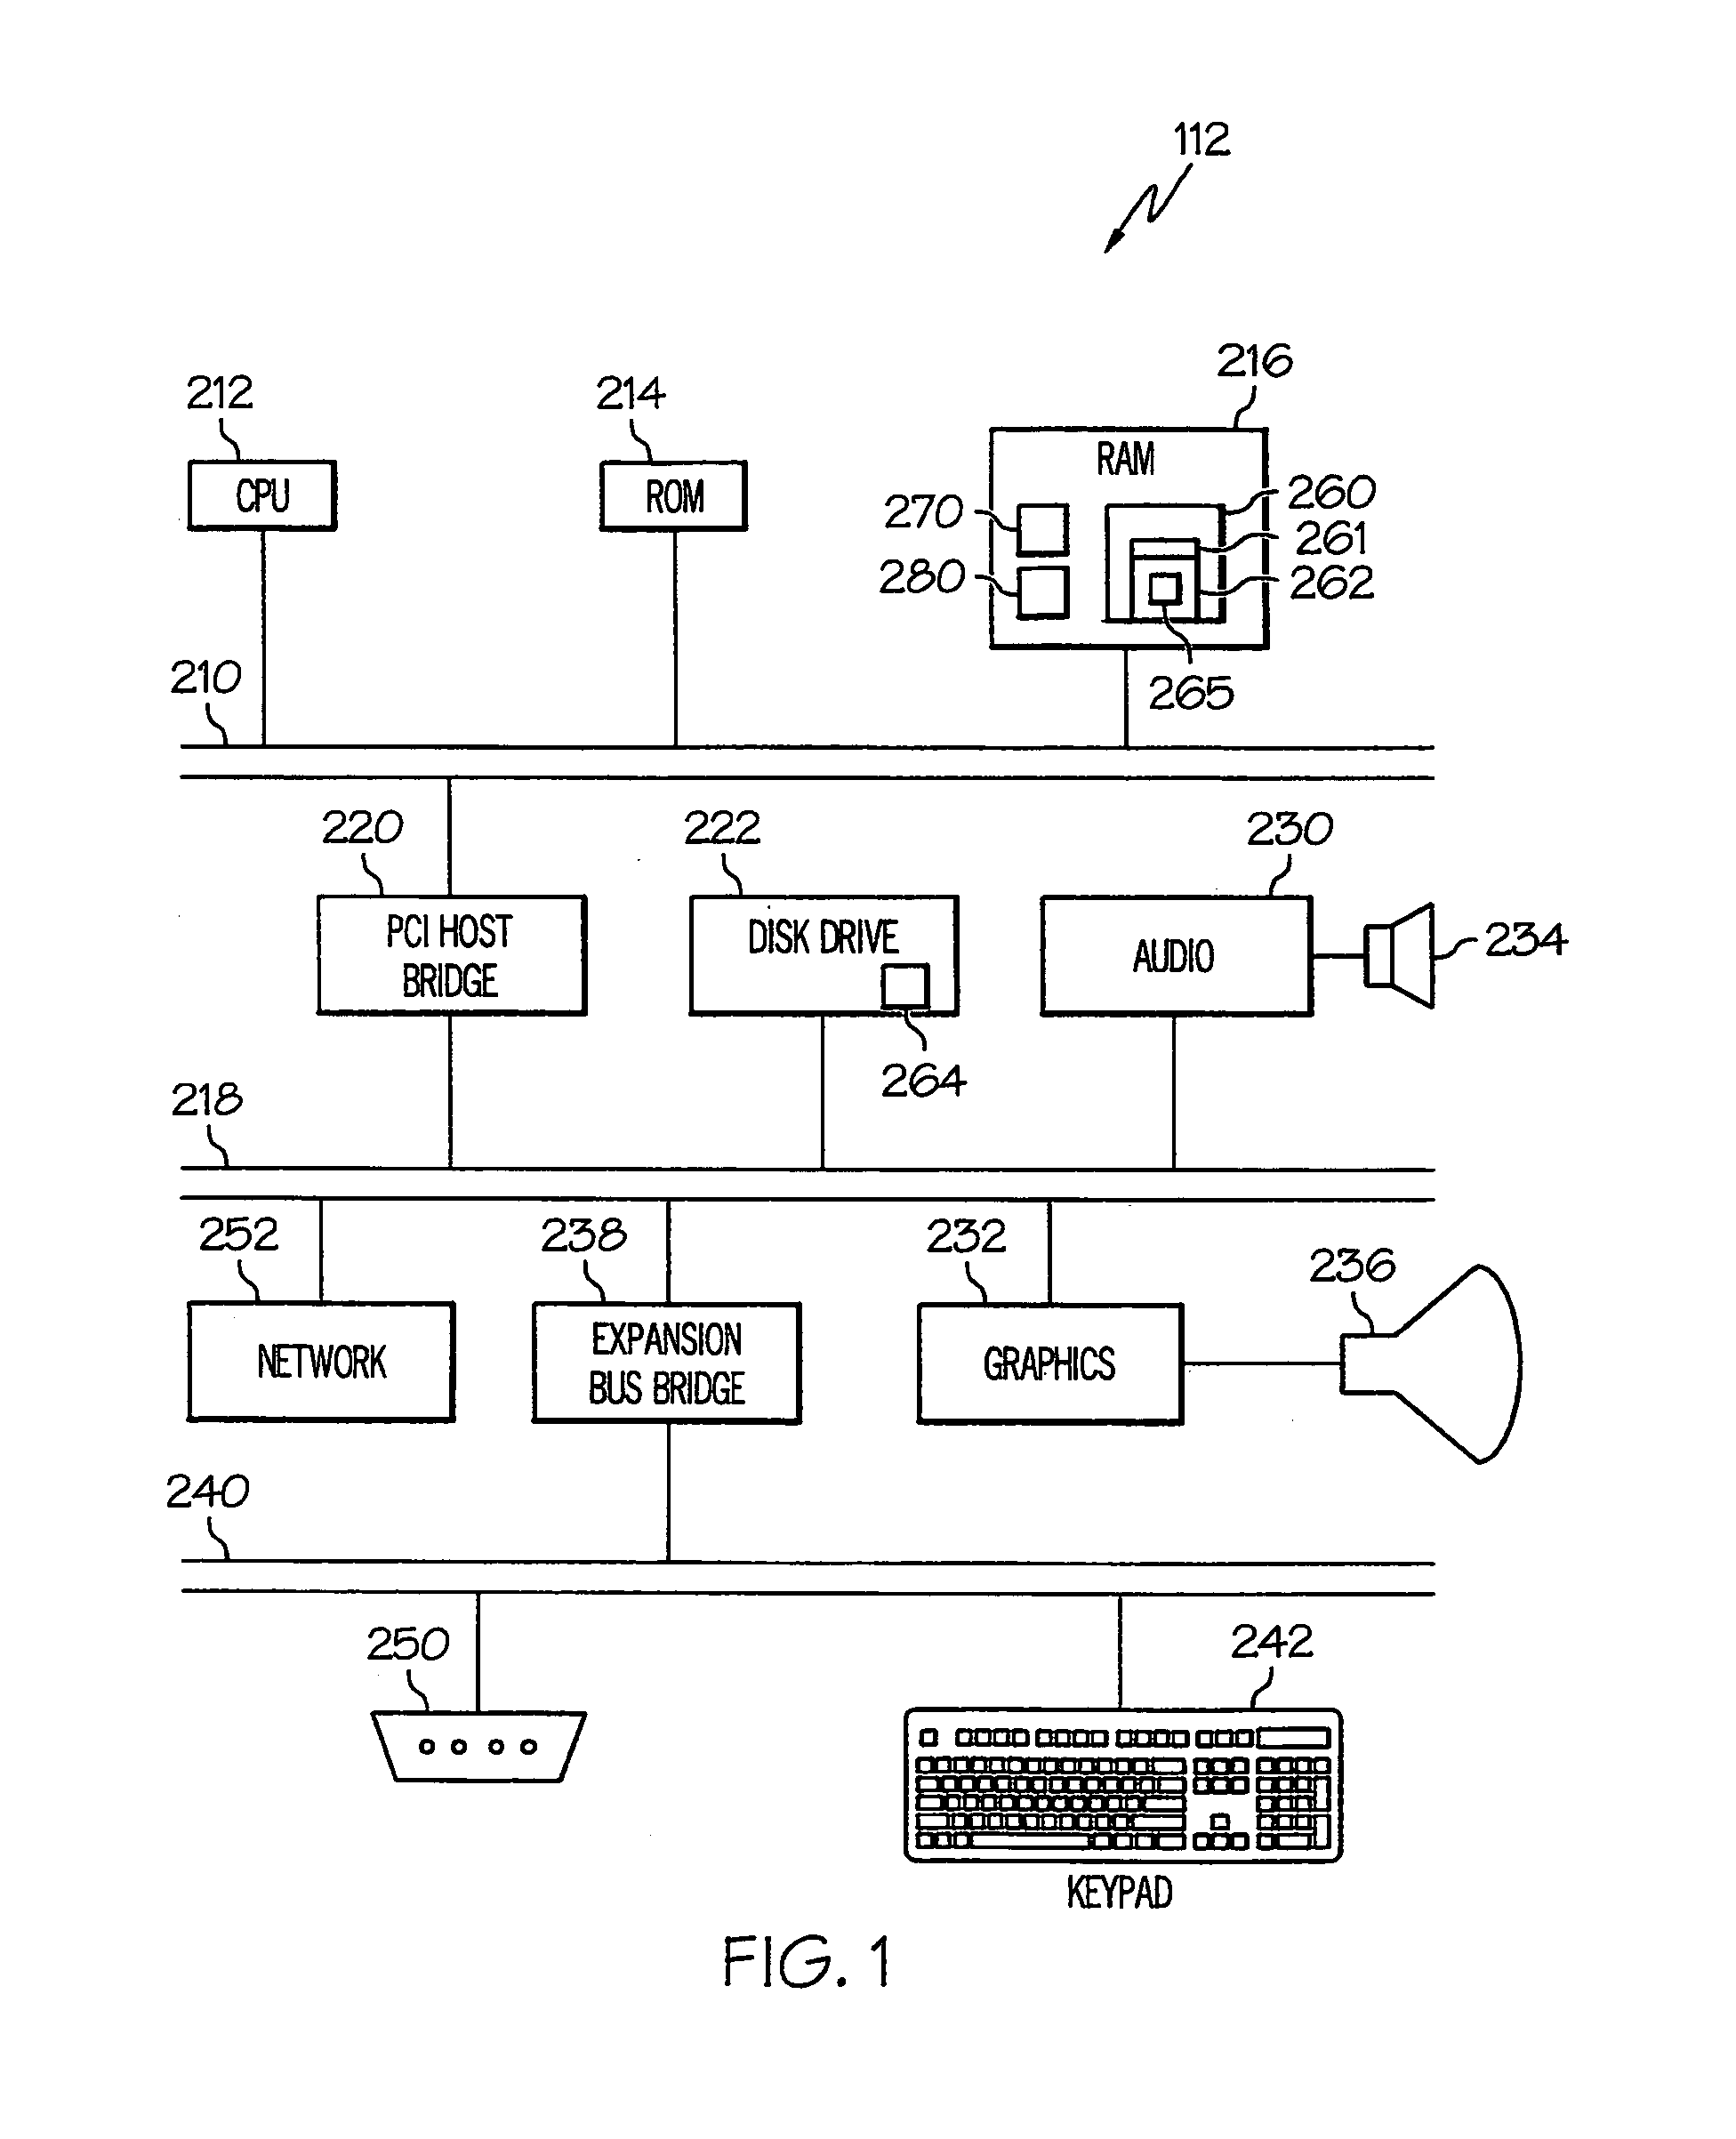 Method and system for triggering enhanced security verification in response to atypical selections at a service-oriented user interface terminal